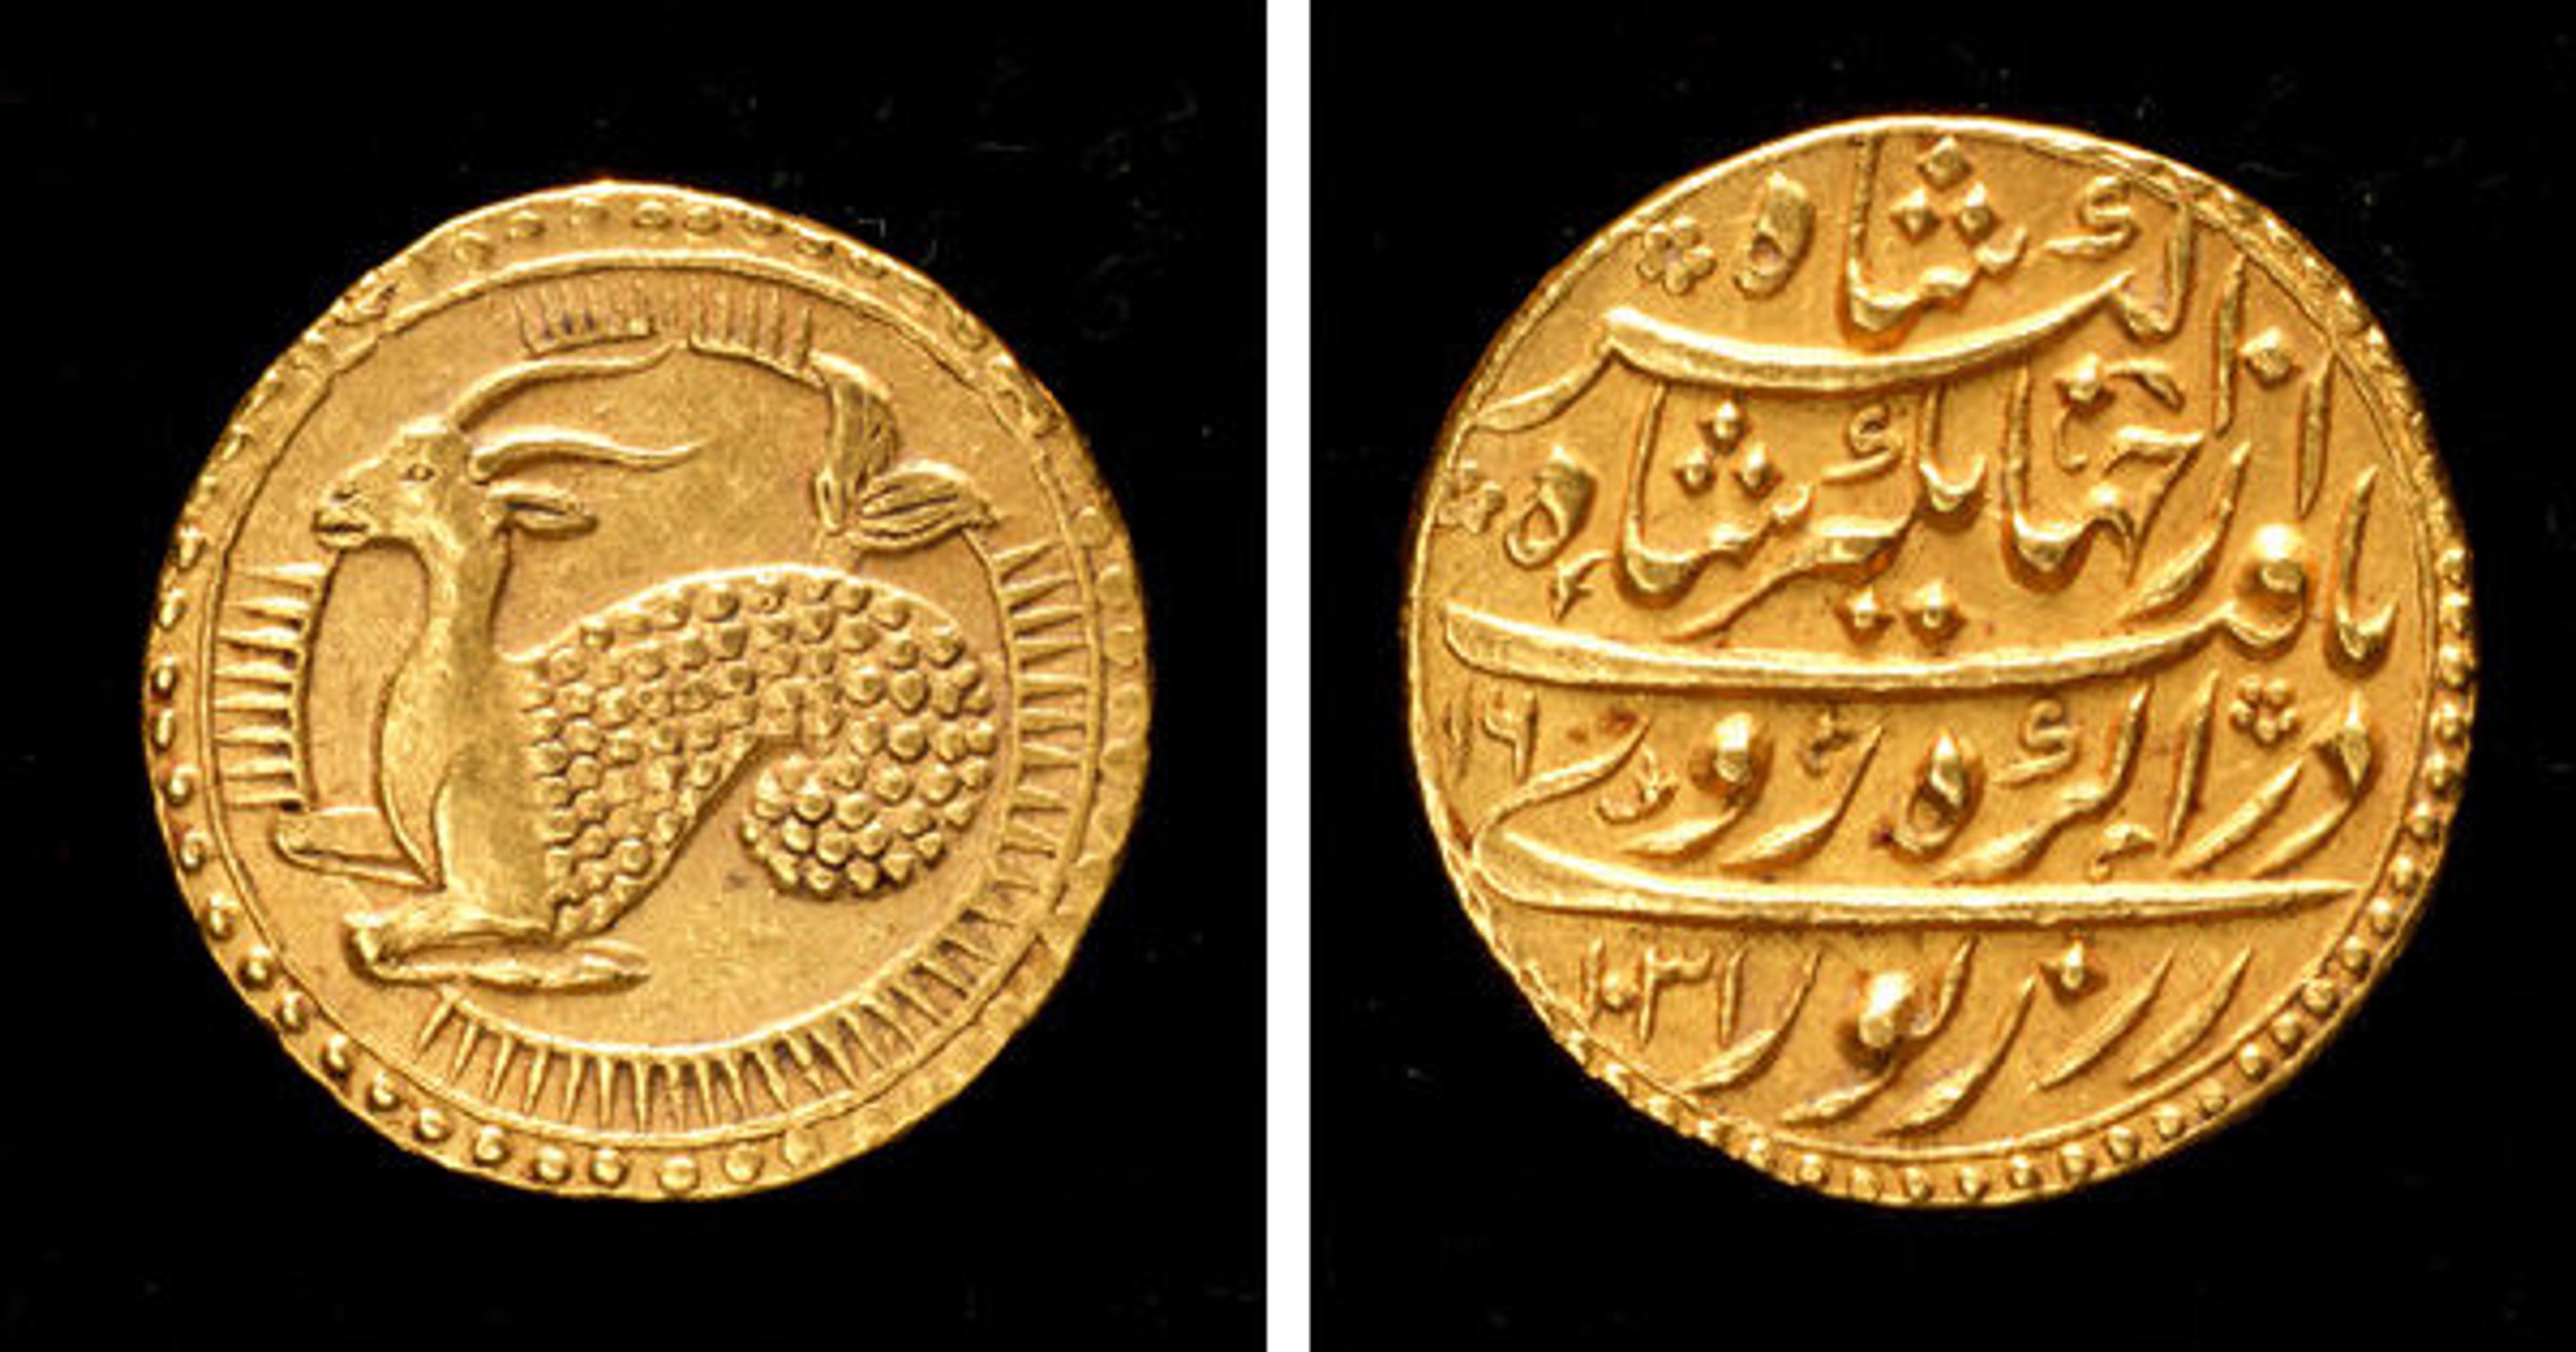 Coin, dated A.H. 1031/A.D. 1621–22. India, Agra. Islamic. Gold; Diam. 13/16 in. (2.1 cm), W. 1/16 in. (0.2 cm). The Metropolitan Museum of Art, New York, Bequest of Joseph H. Durkee, 1898 (99.35.7401)